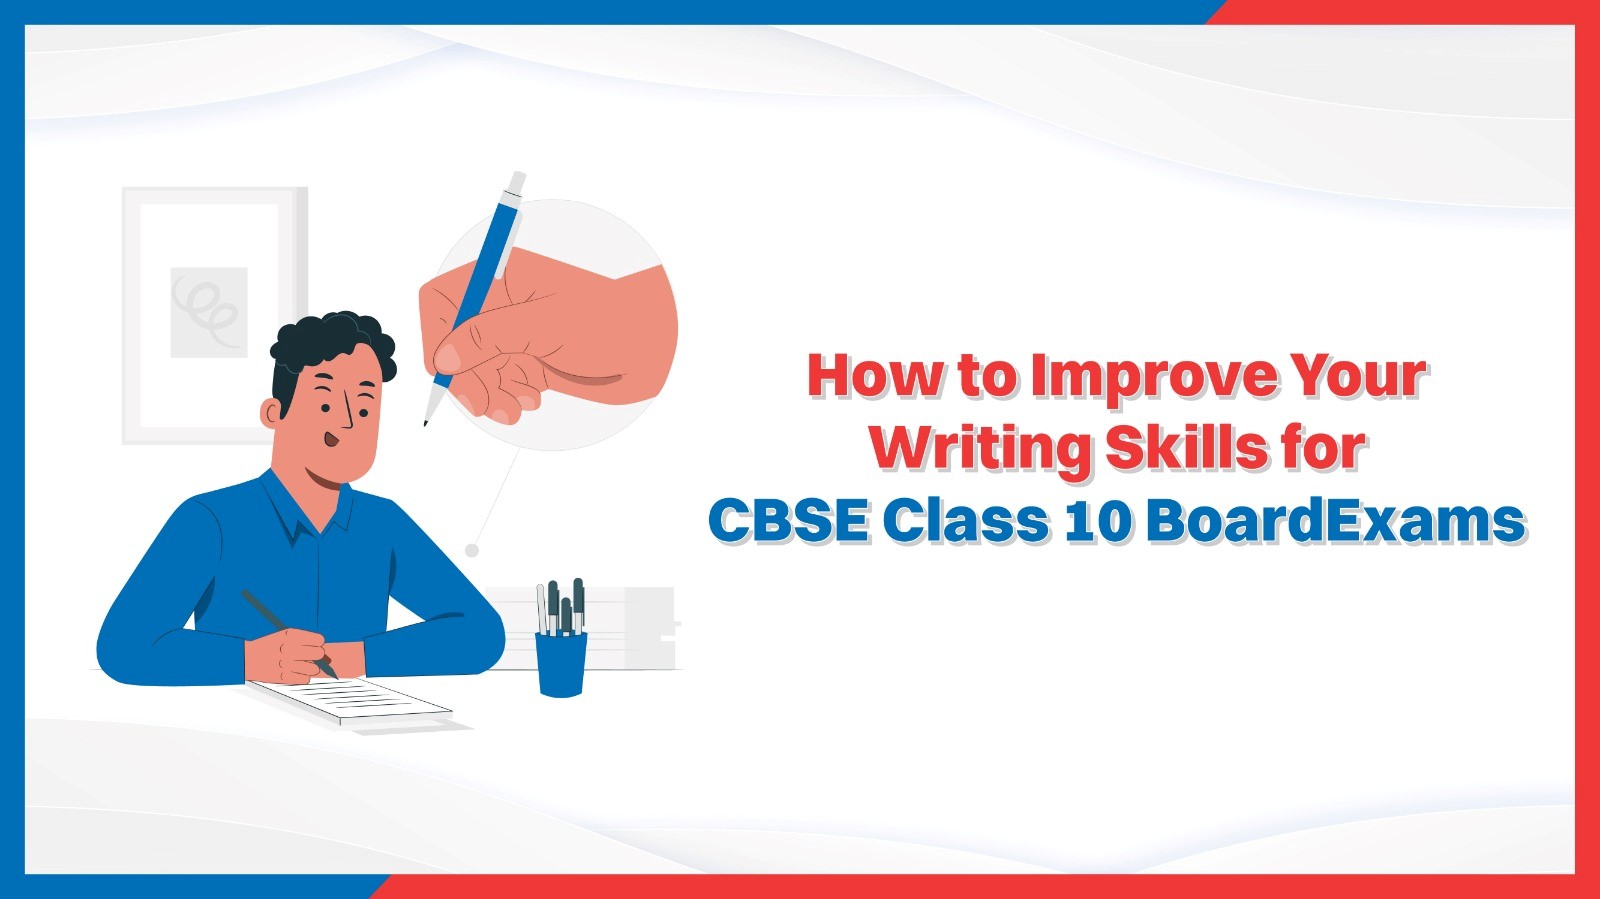 How to Improve Your Writing Skills for CBSE Class 10 Board Exams